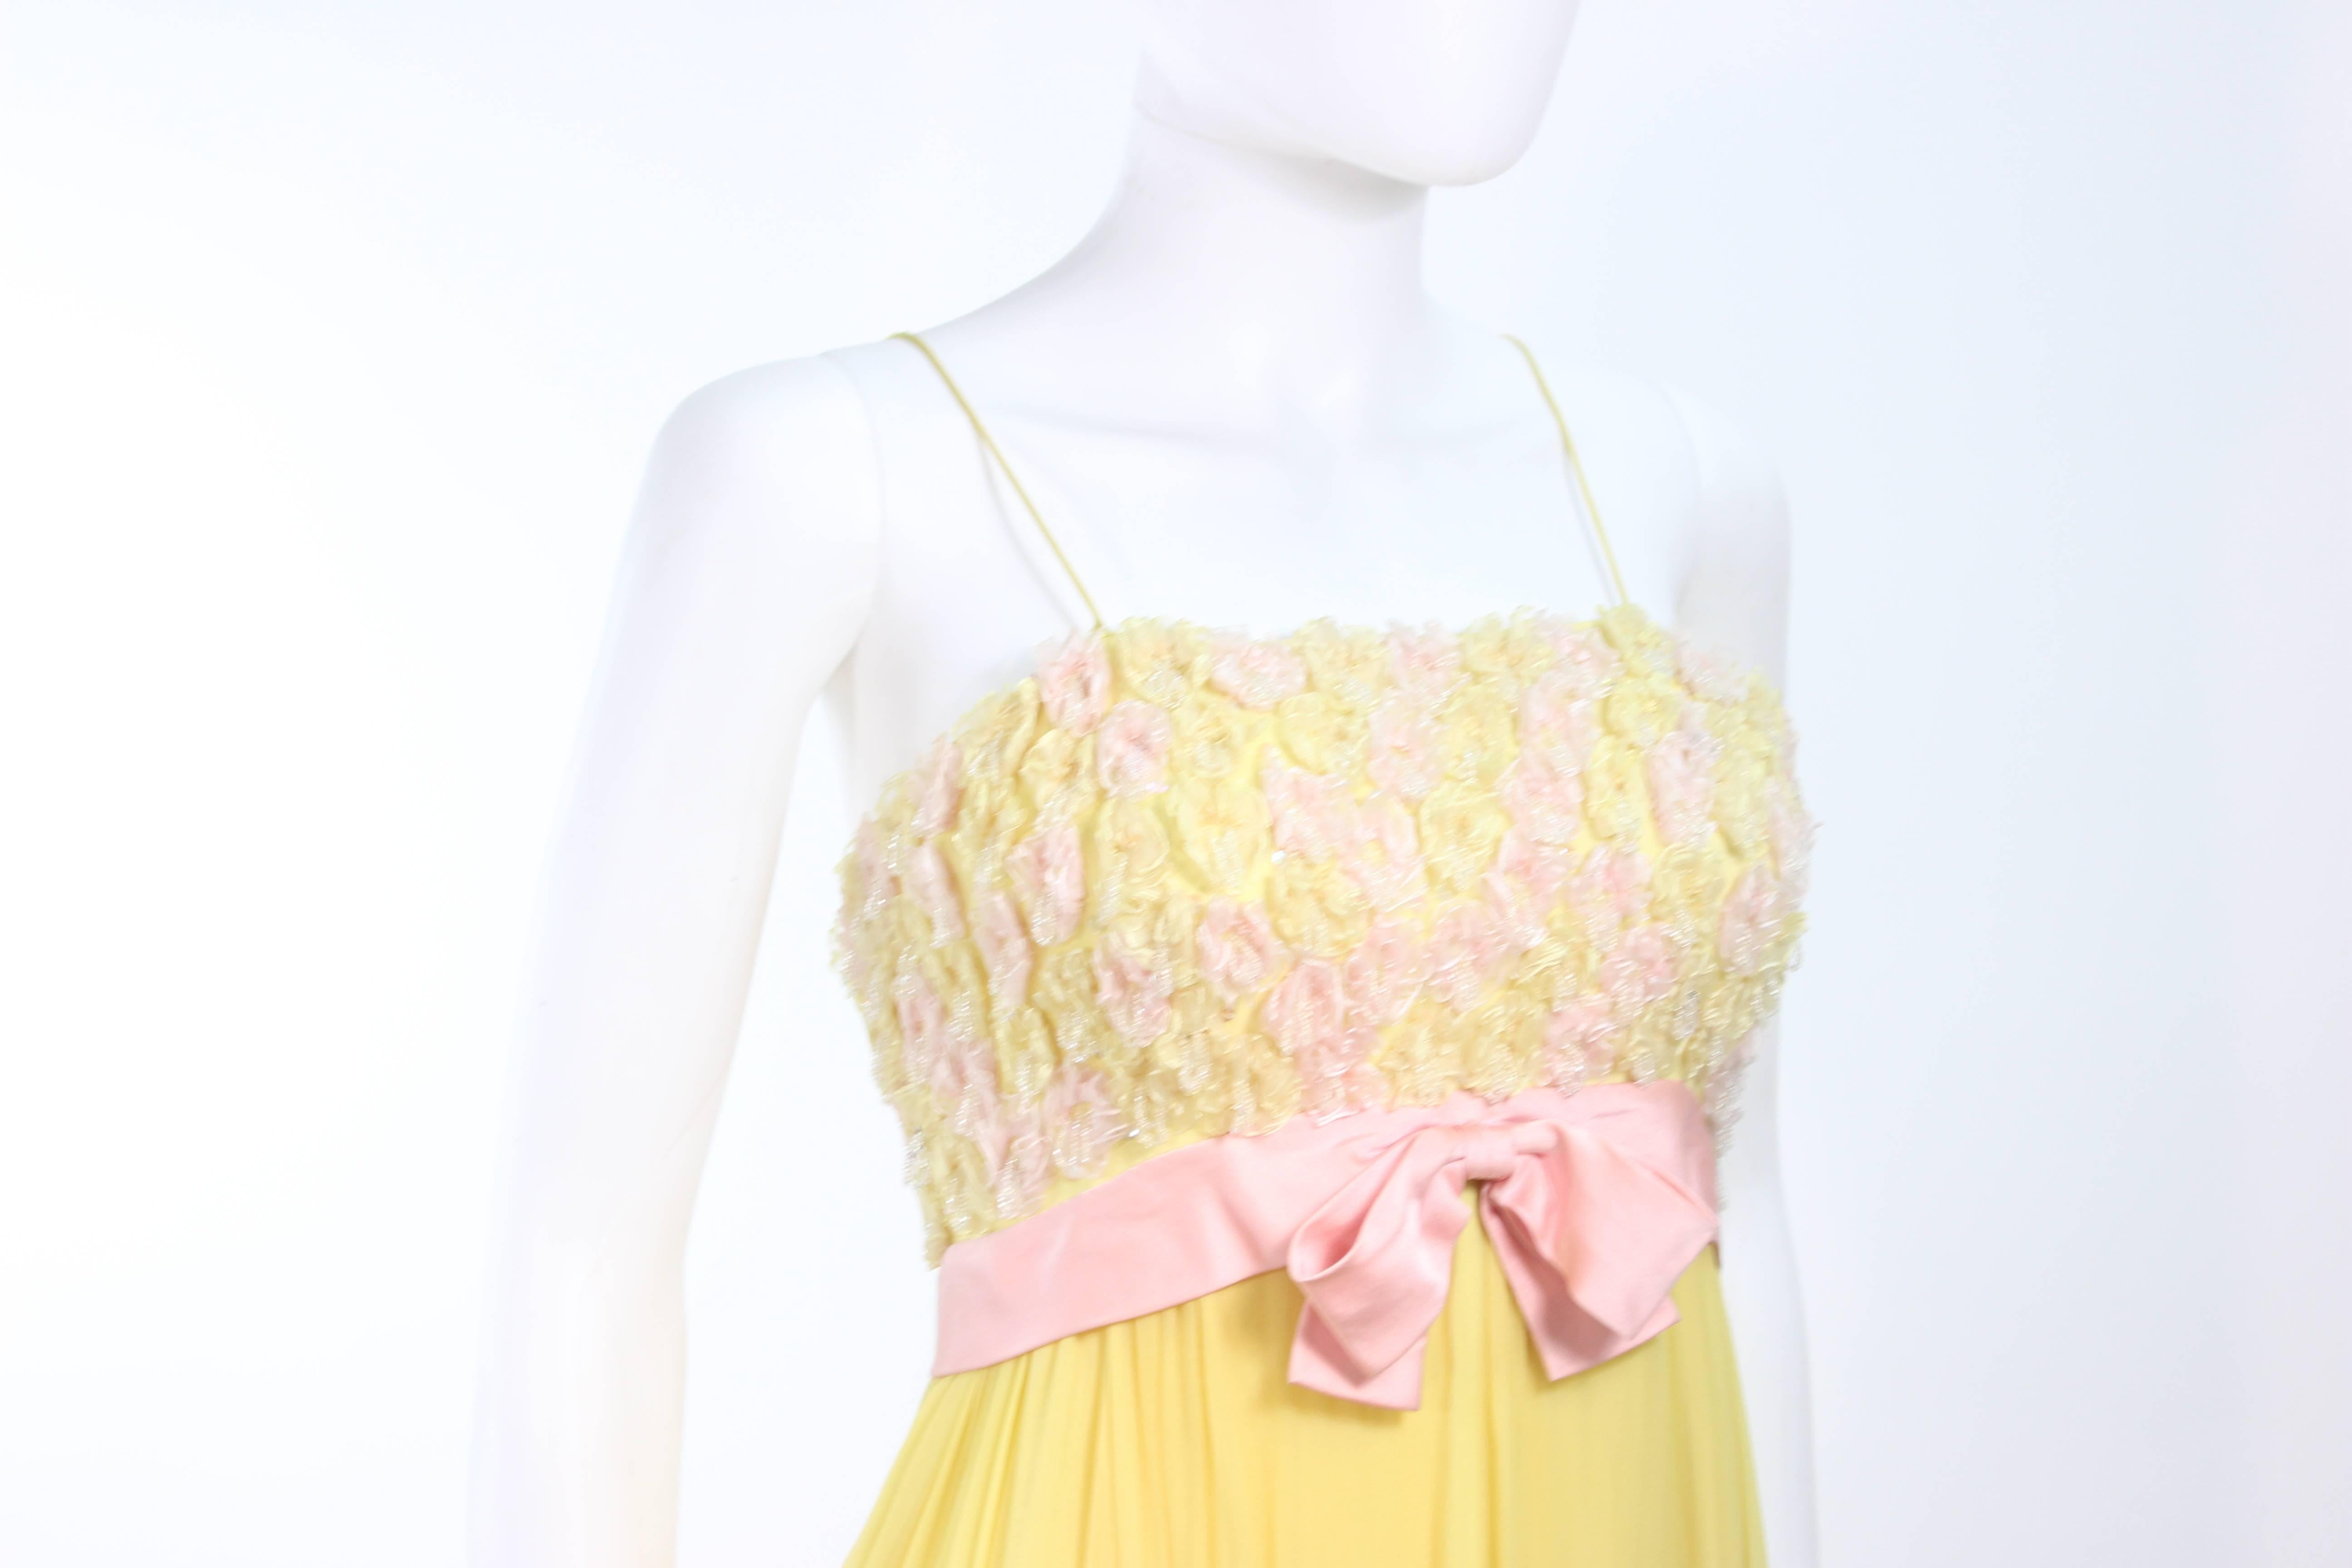 VICTORIA ROYAL Embellished Yellow Silk Gown Size 4 In Excellent Condition For Sale In Los Angeles, CA